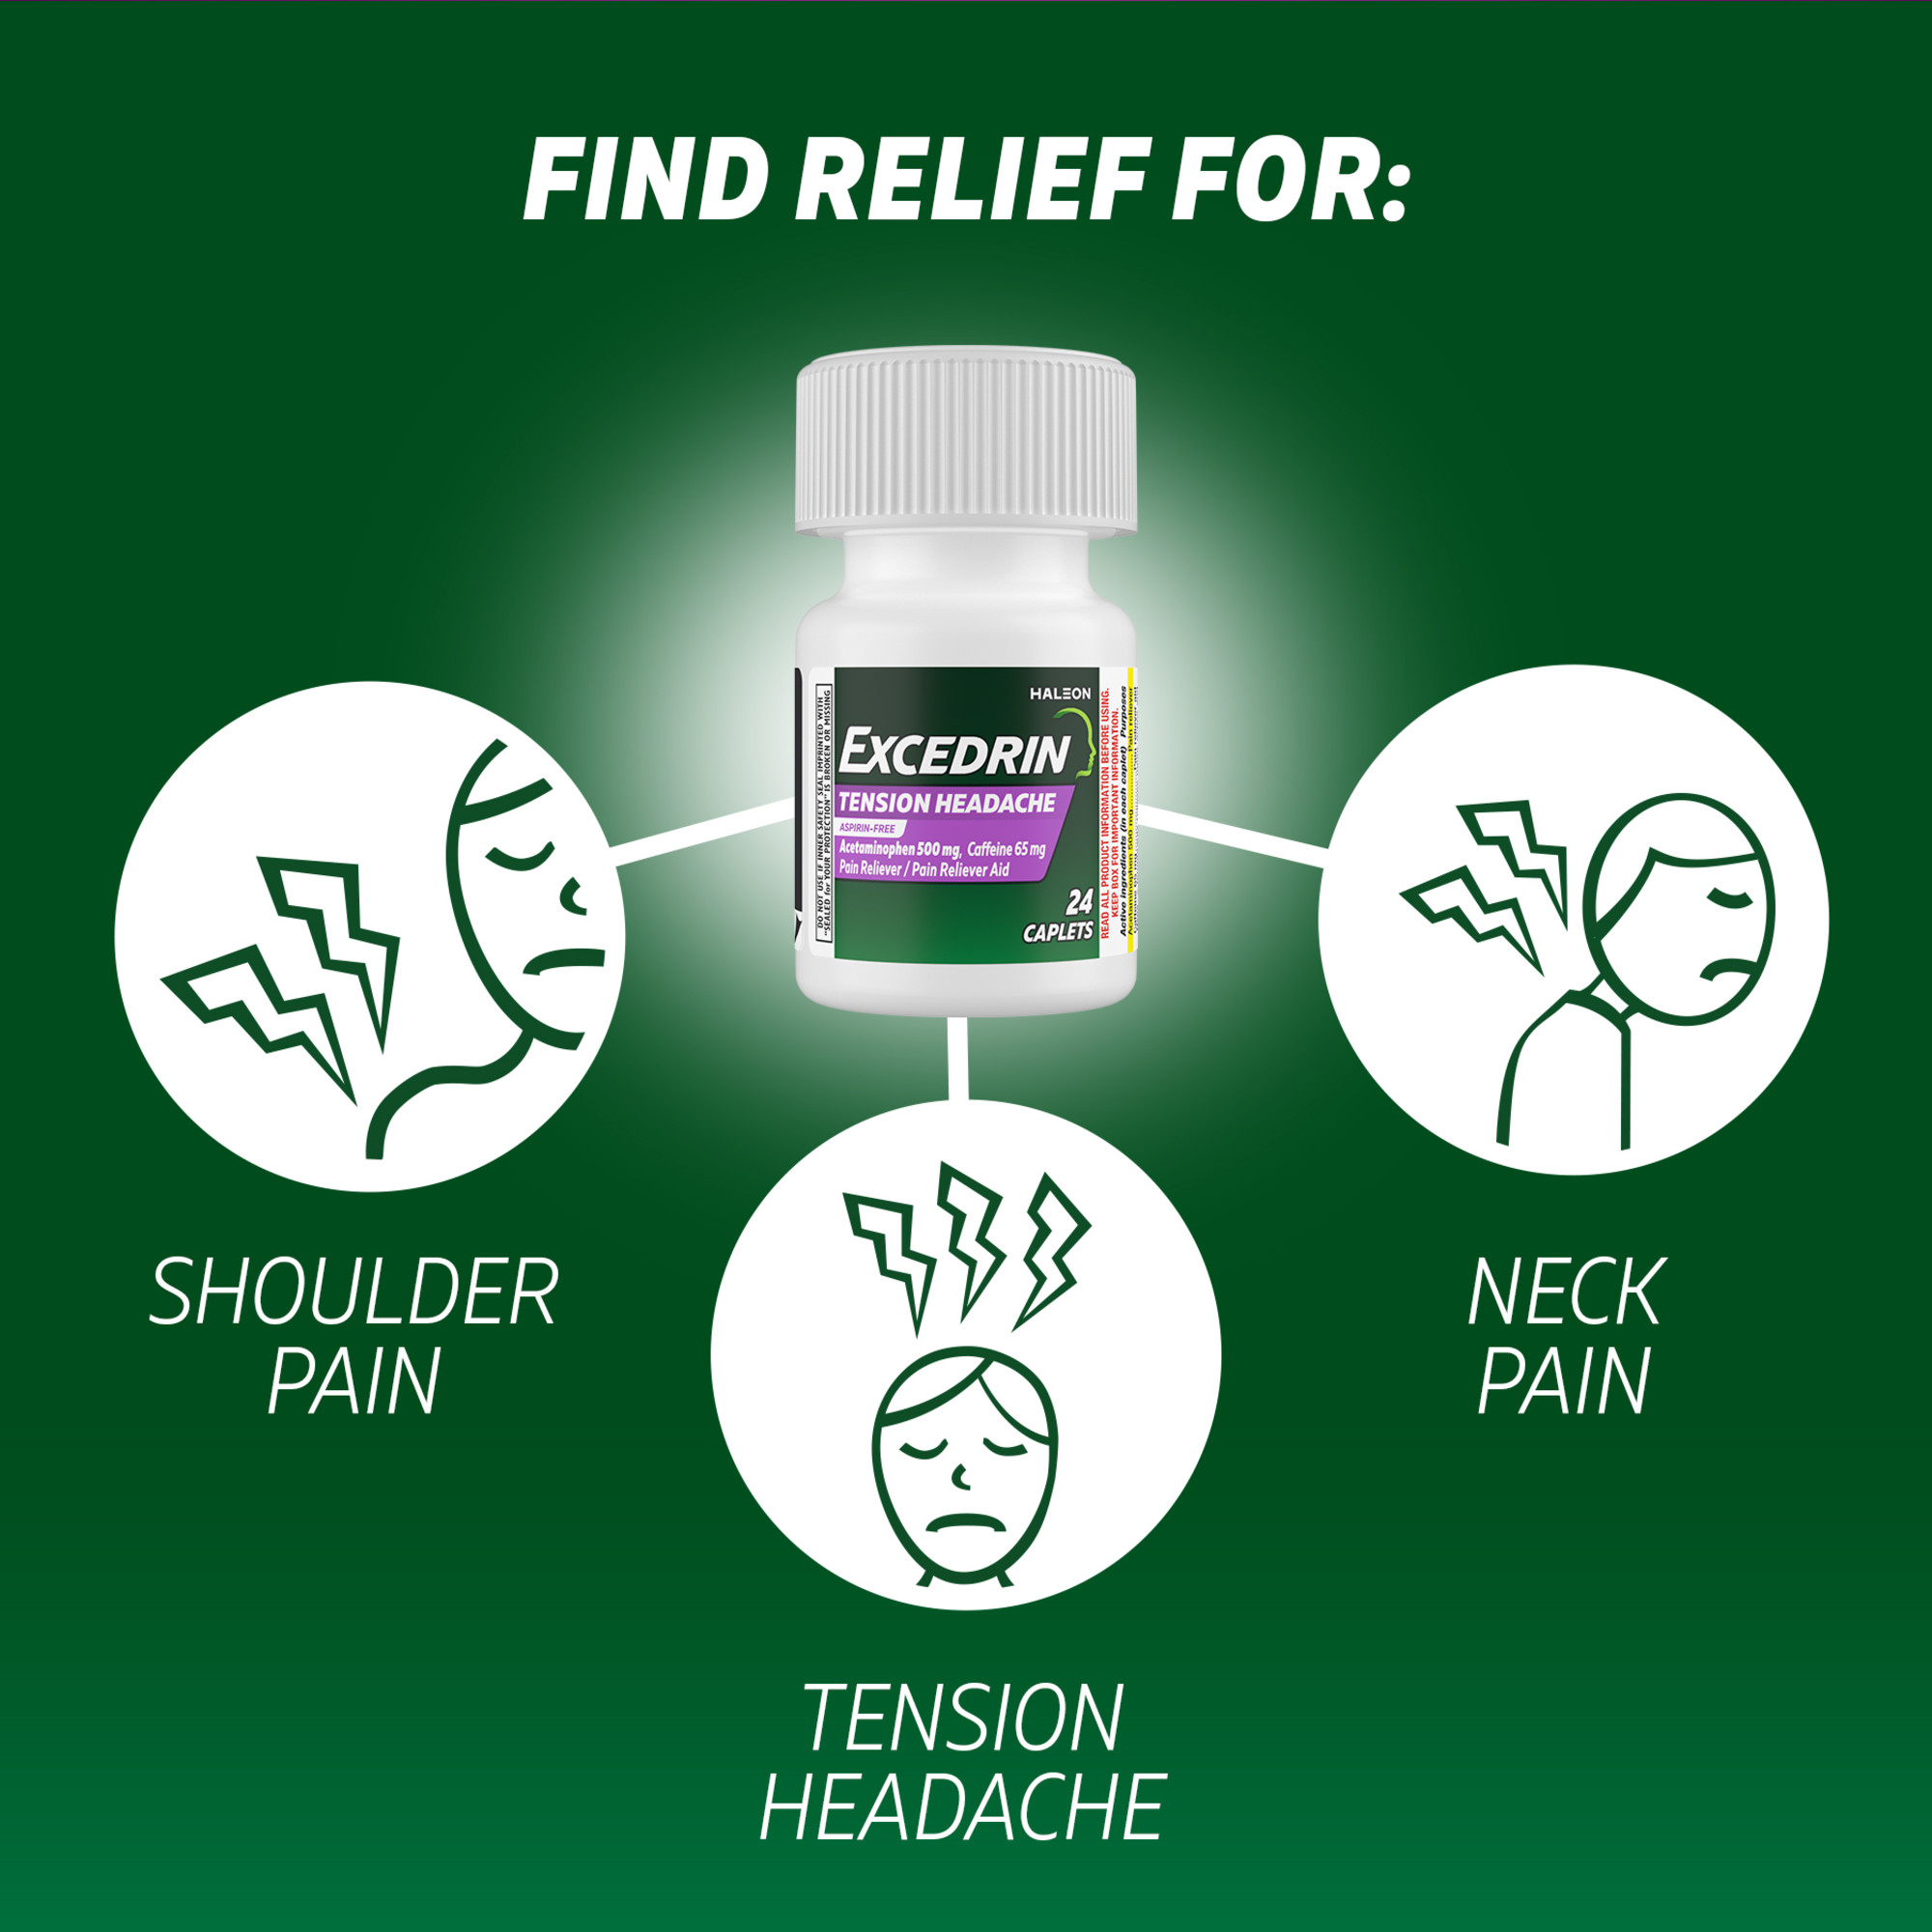 Excedrin Tension Headache Relief Acetaminophen and Caffeine Caplets, 24 Count - image 4 of 10